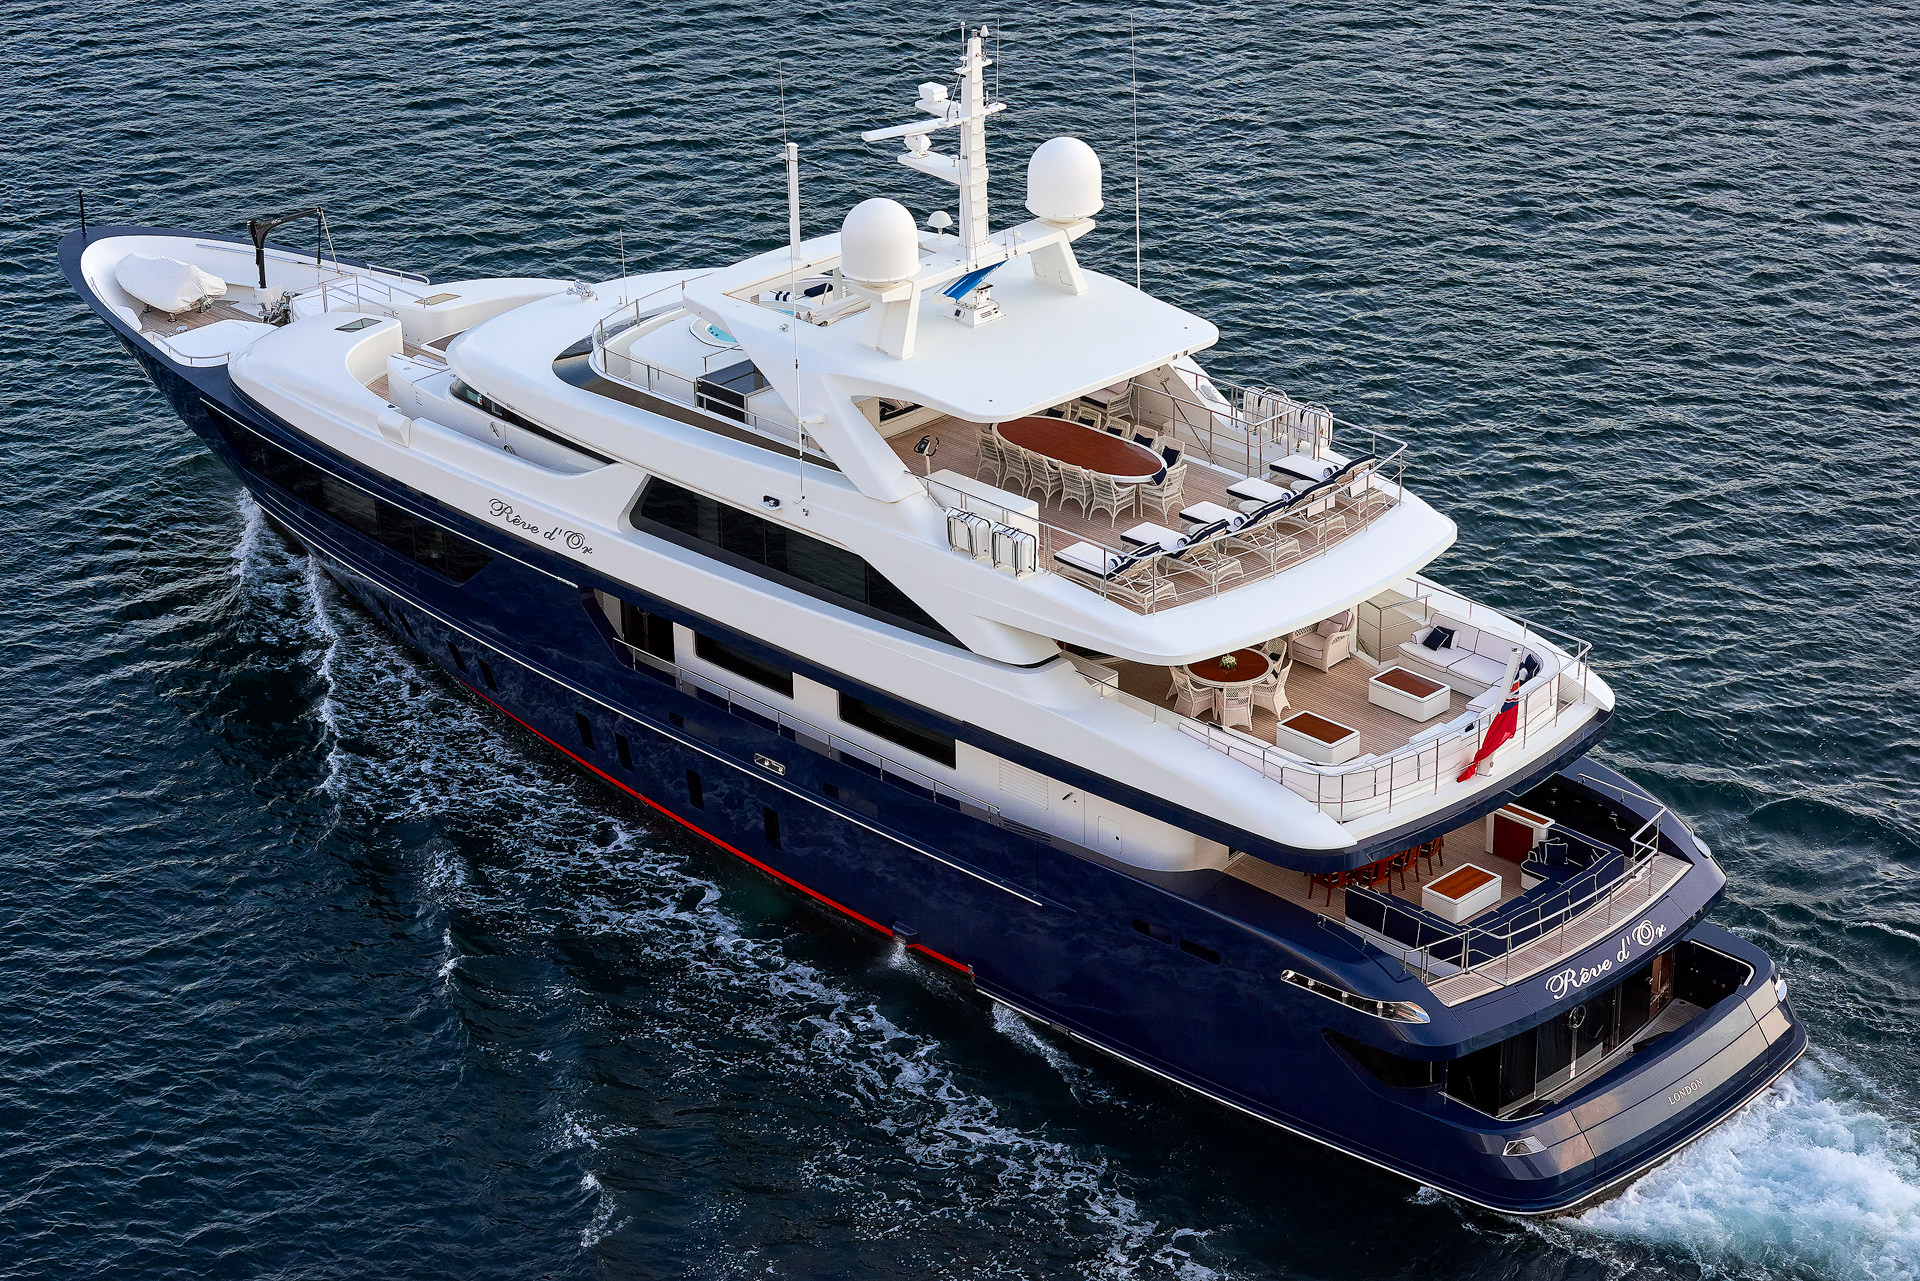 Yacht REVE D'OR By Sanlorenzo - Profile Of The Decks From Above  